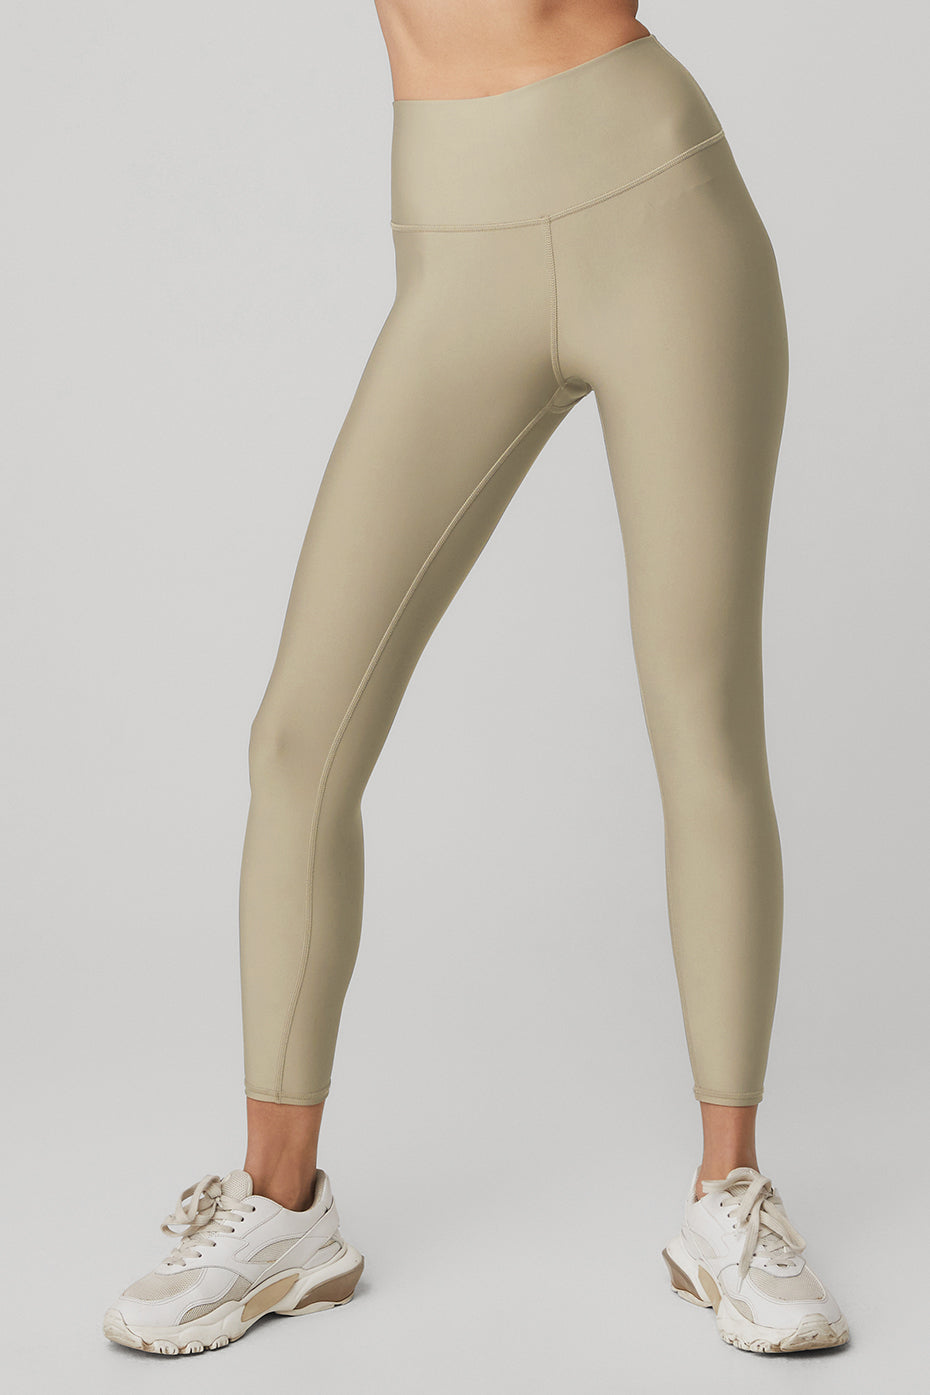 7/8 High-Waist Airlift Legging in California Sand by Alo Yoga